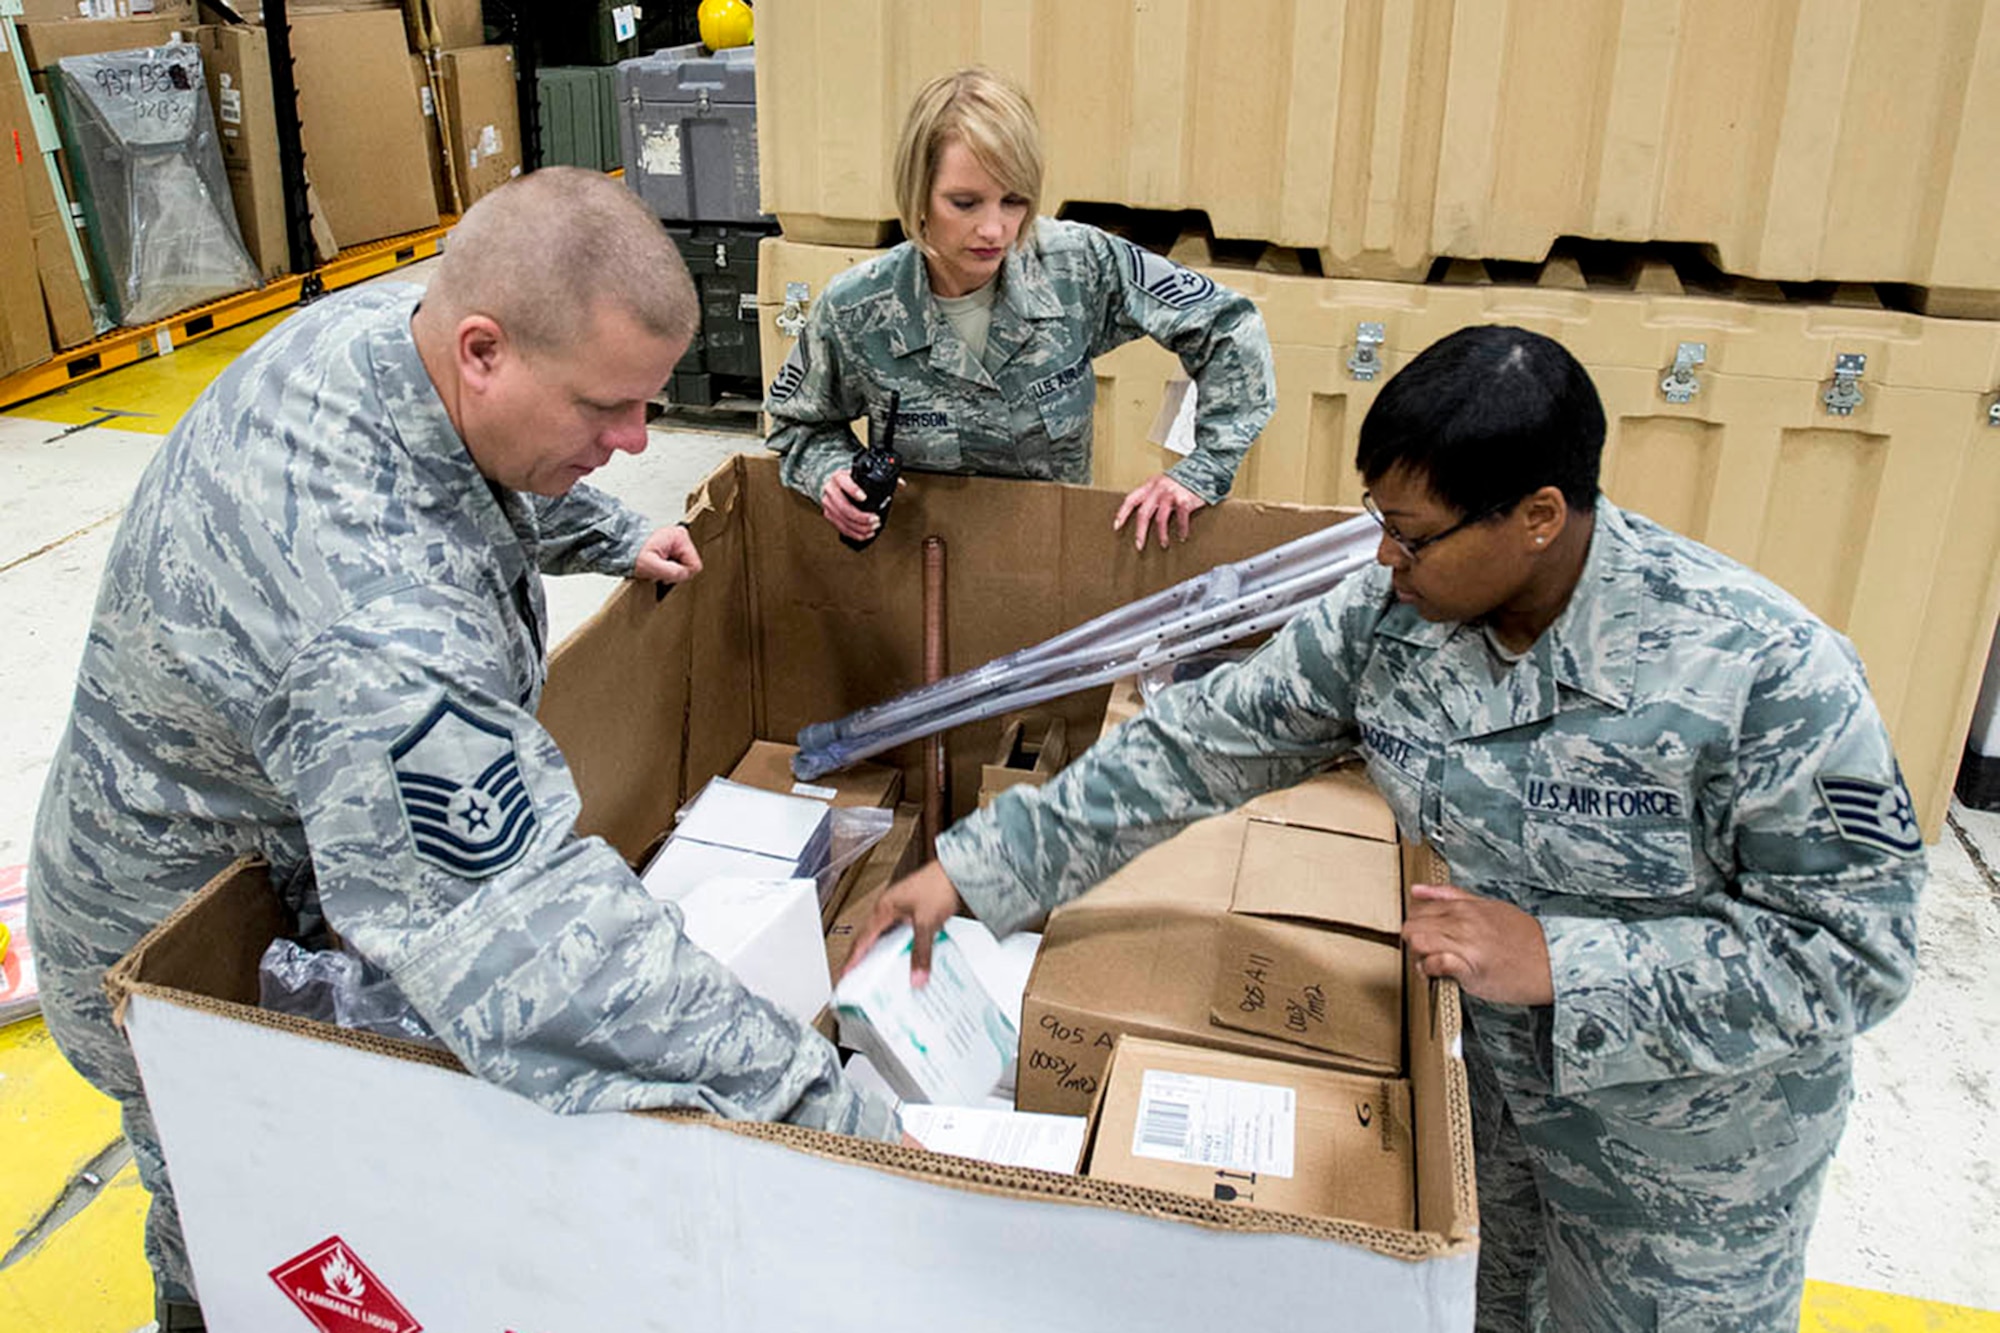 Senior Master Sgt. Michelle Anderson (center), 446th Aeromedical Staging Squadron, Medical Readiness Flight superintendent, out of McChord Field, Wash., and Airmen from Fairchild Air Force Base, Wash., inventory medical supplies, Aug. 2, 2013. When she isn’t fulfilling her Reserve duties, Anderson operates her professional soft-skills training company, Star Services NW. (U.S. Air National Guard photo by Master Sgt. Michael Stewart)